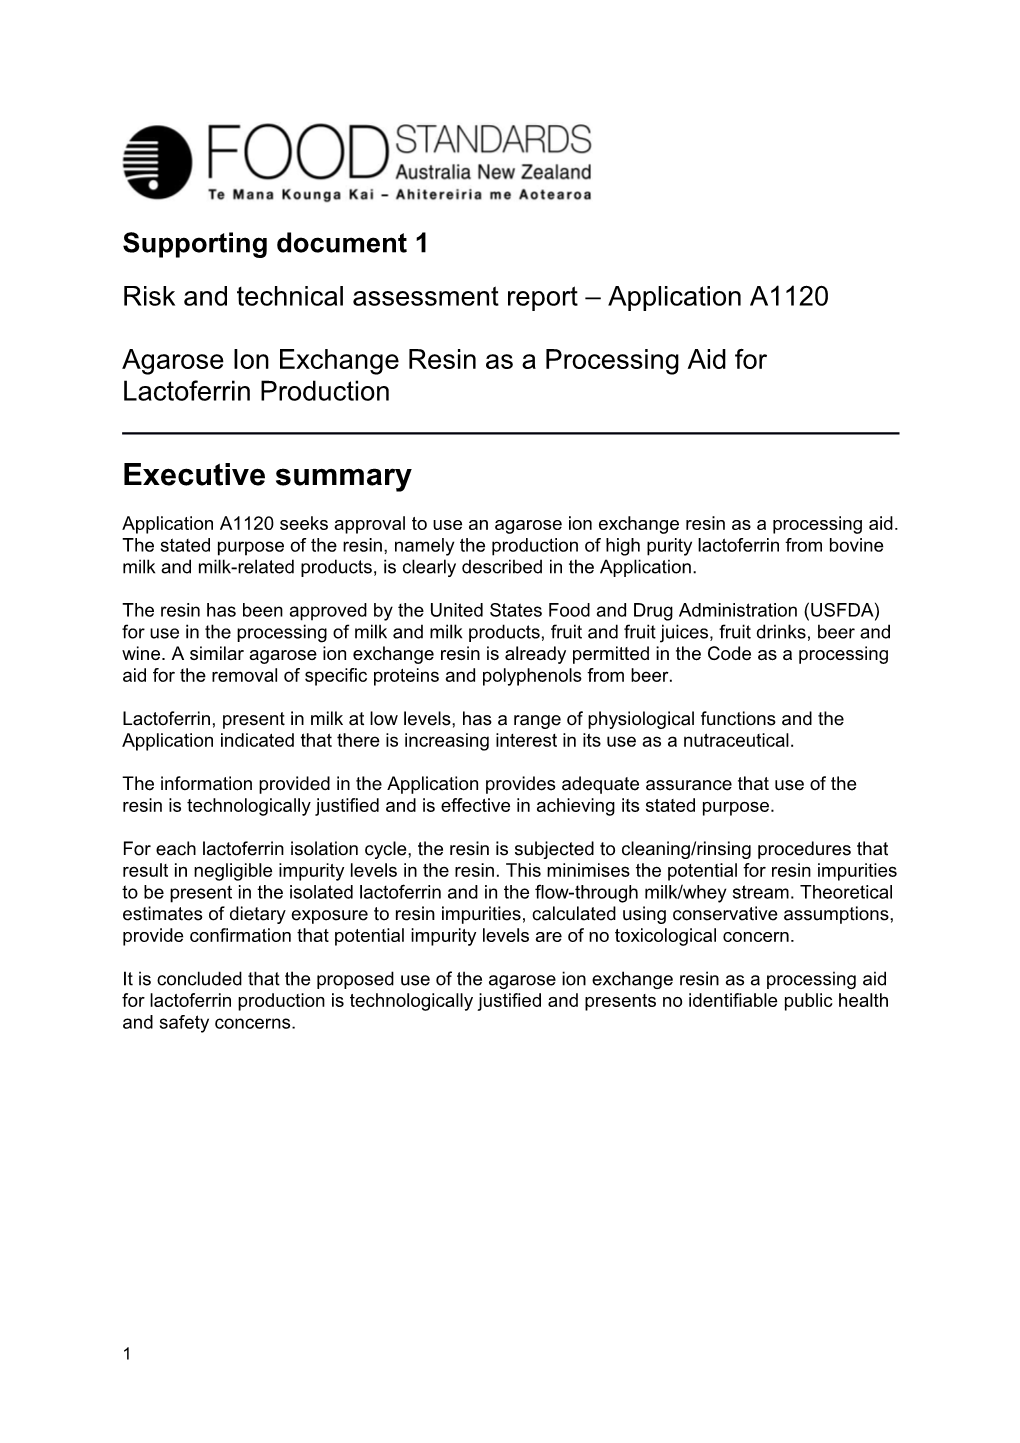 Risk and Technical Assessment Report Application A1120